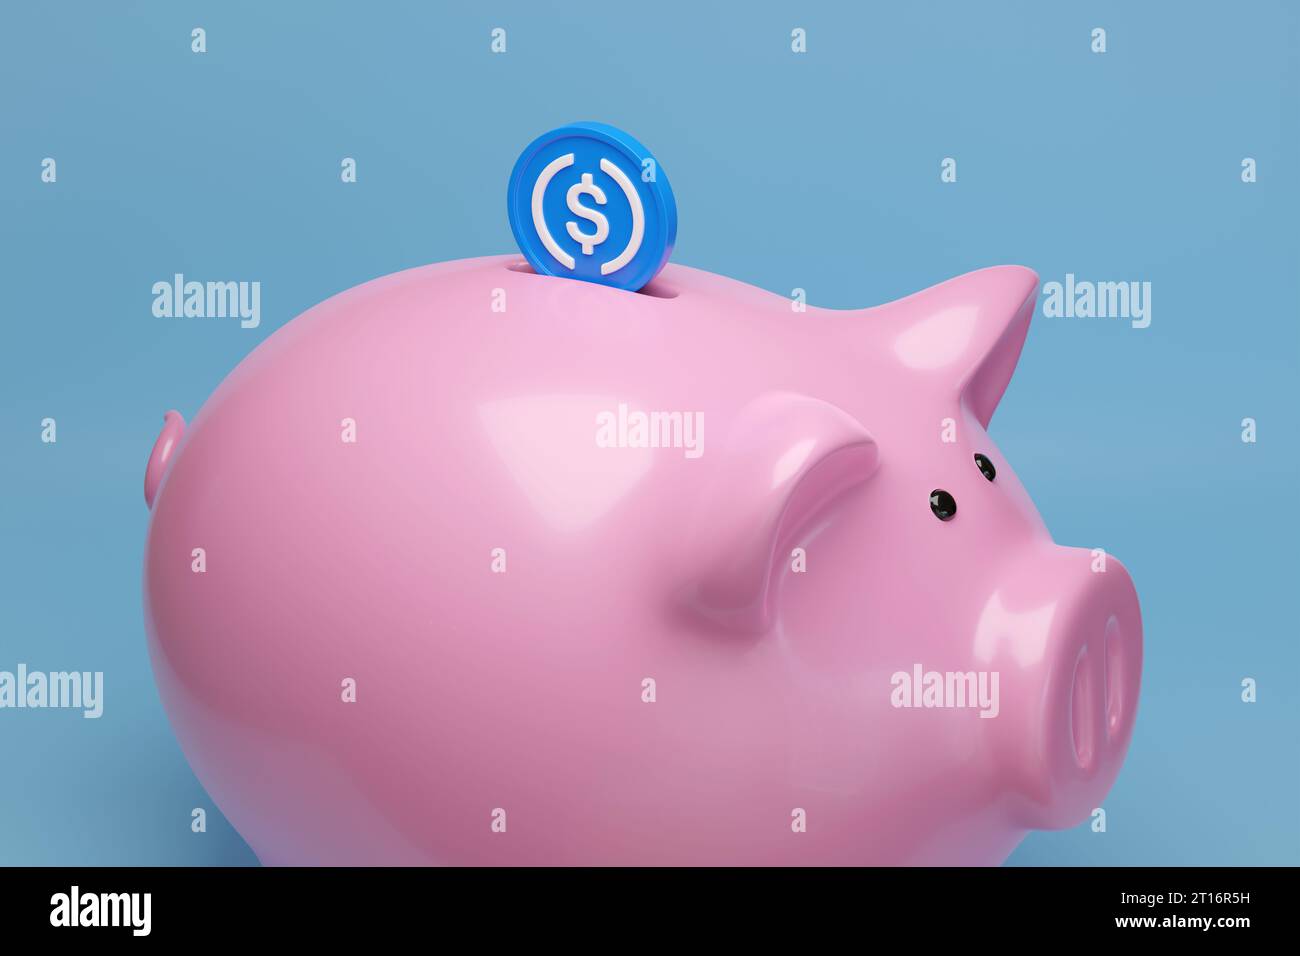 USDC coin entering on Piggy bank. 3d illustration. Stock Photo